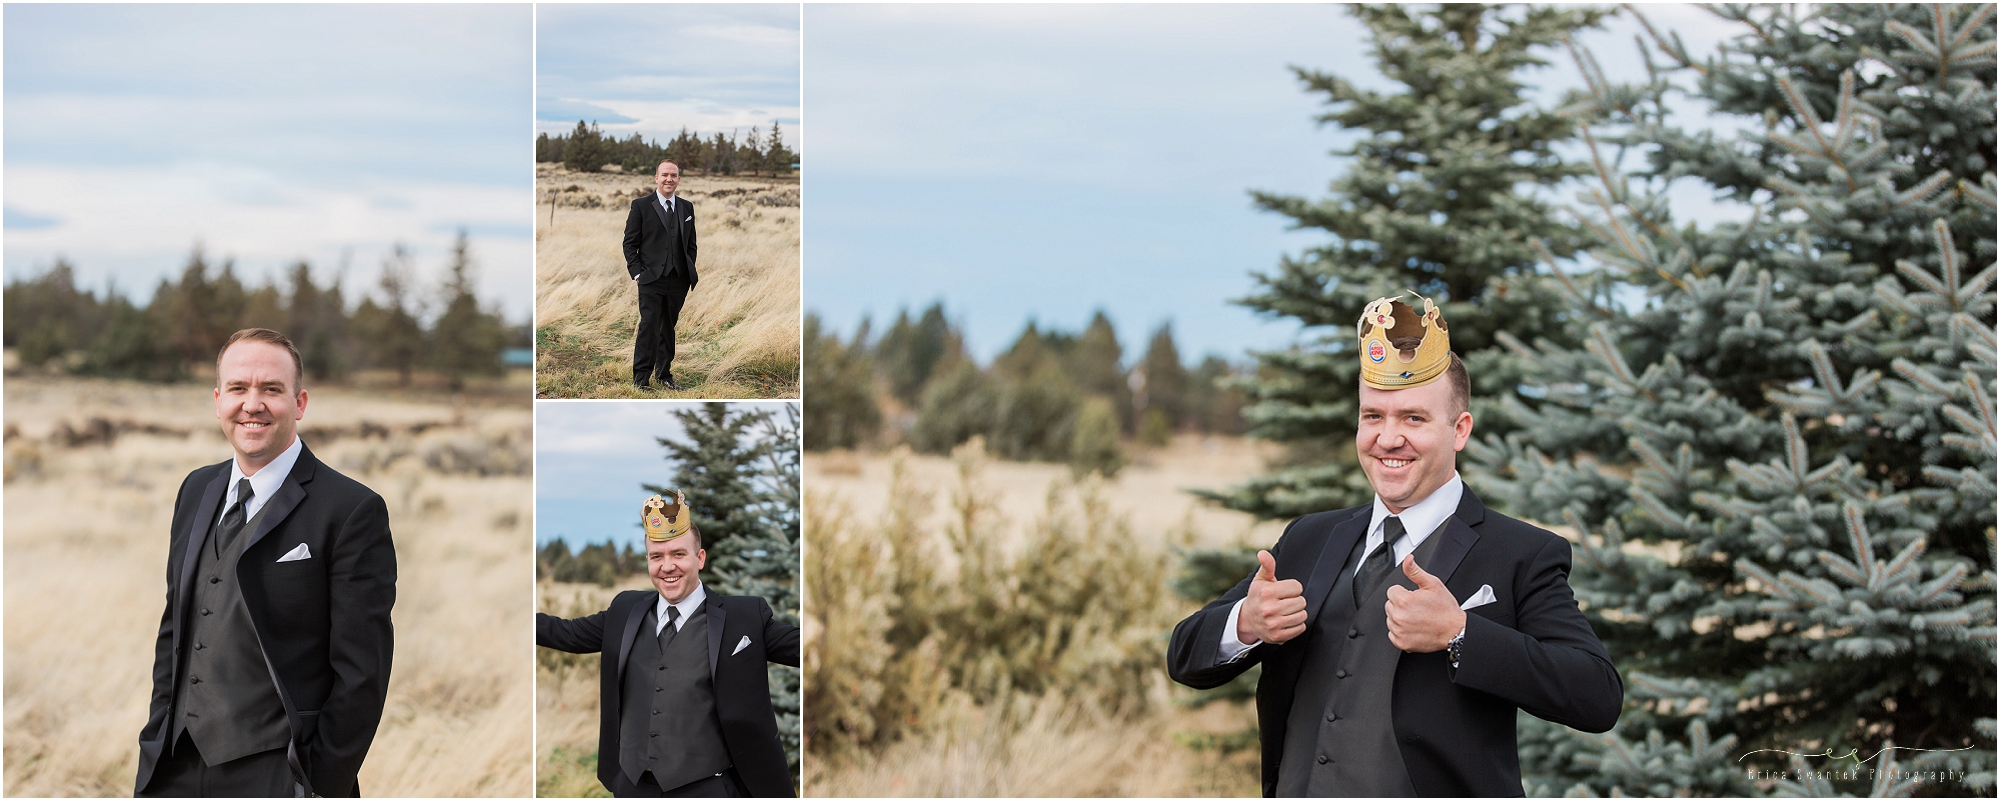 A groom full of humor is the best kind in this winter woodland wedding in Bend, OR. 